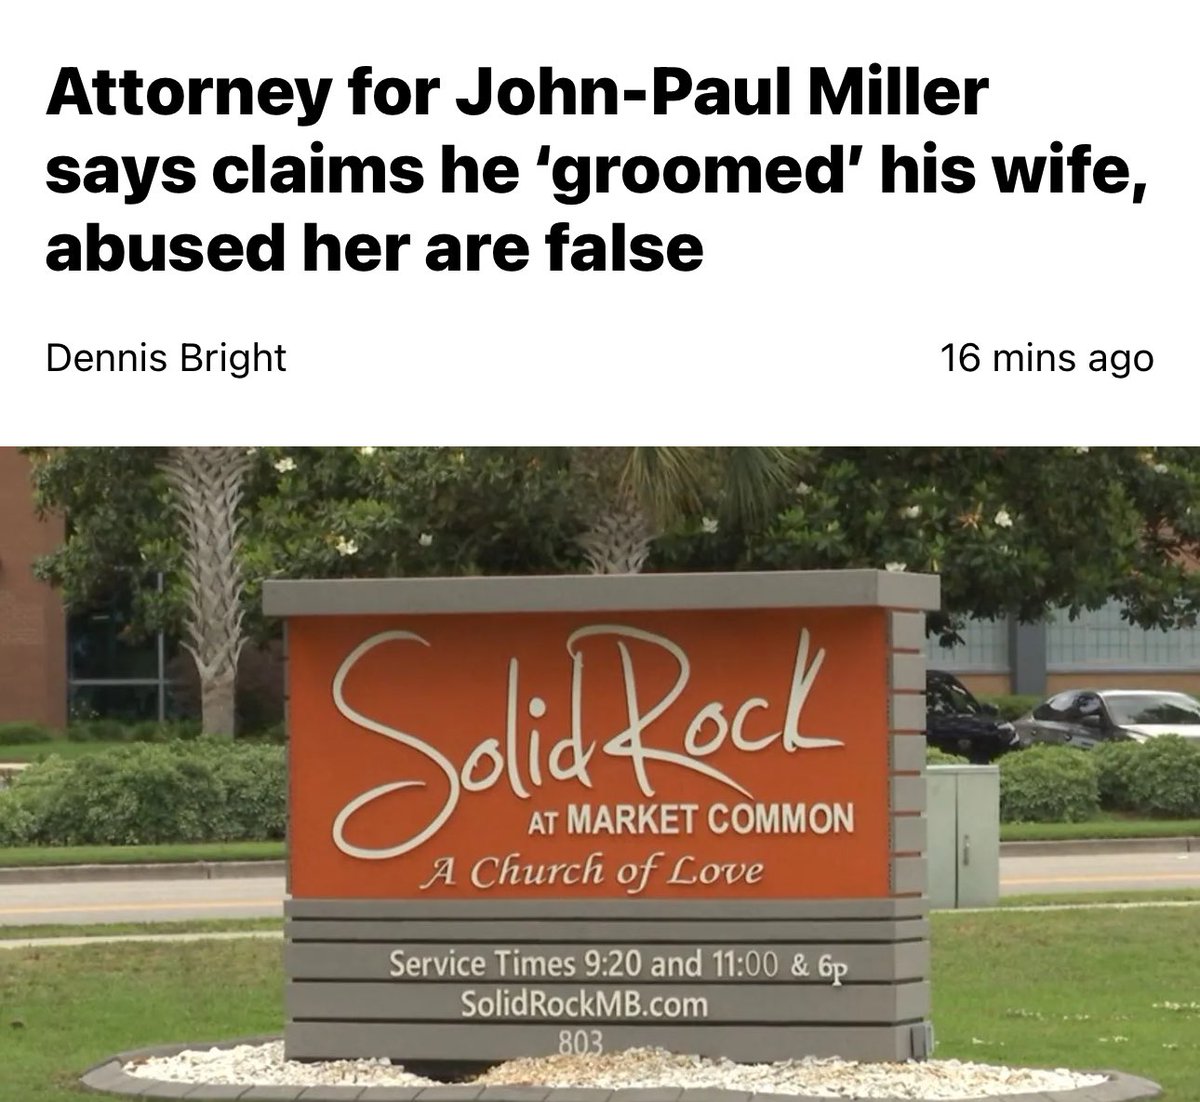 John-Paul Miller SPEAKS! … Through his attorney. “Following the untimely death of Mica Miller, unfounded rumors and false accusations began circulating on social media and in various media outlets, suggesting Pastor Miller’s involvement in her demise. This created a buzz,…